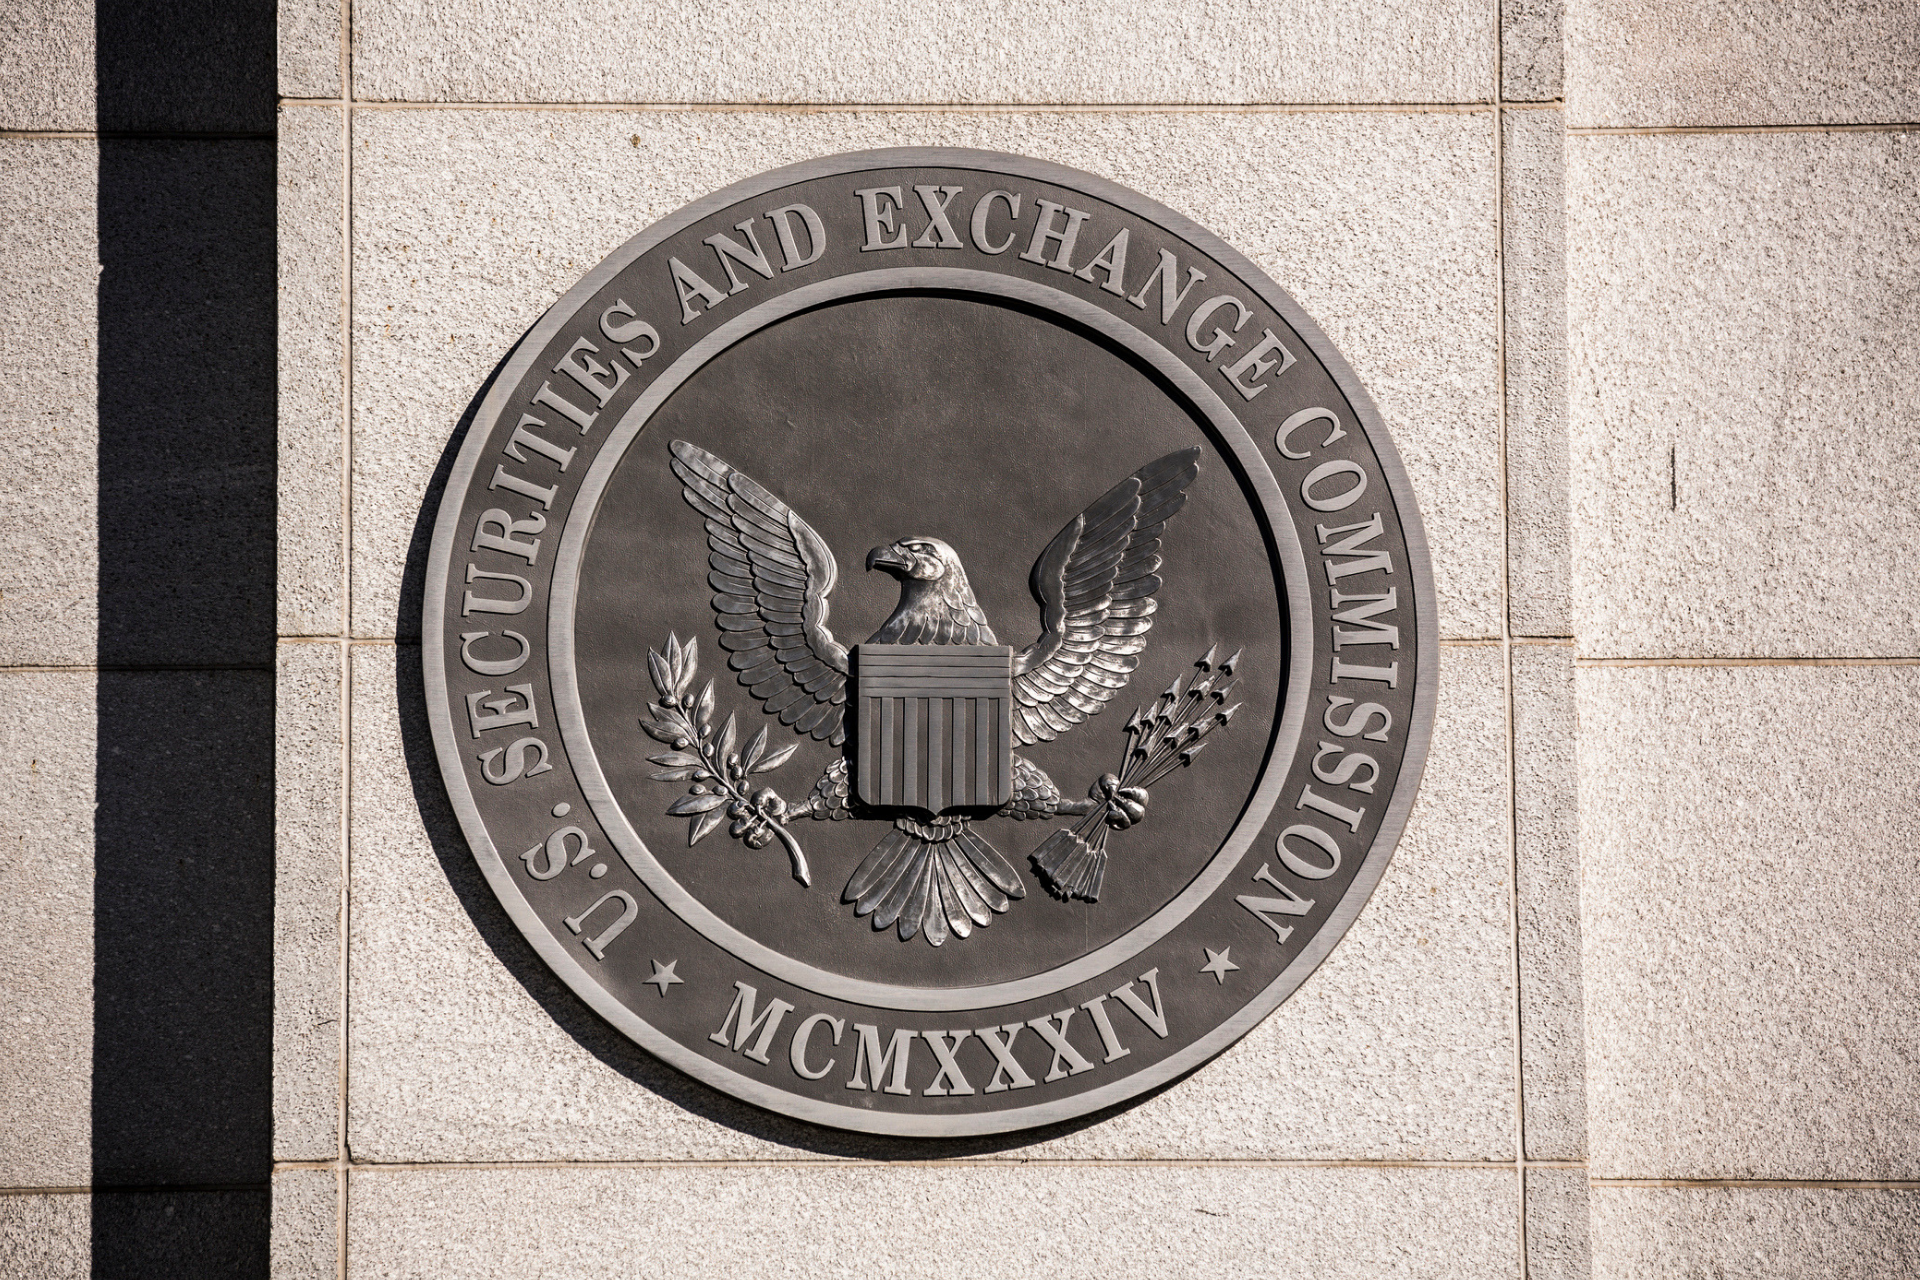 SEC - Proposed Changes To Section 13 Beneficial Ownership Reporting Rules